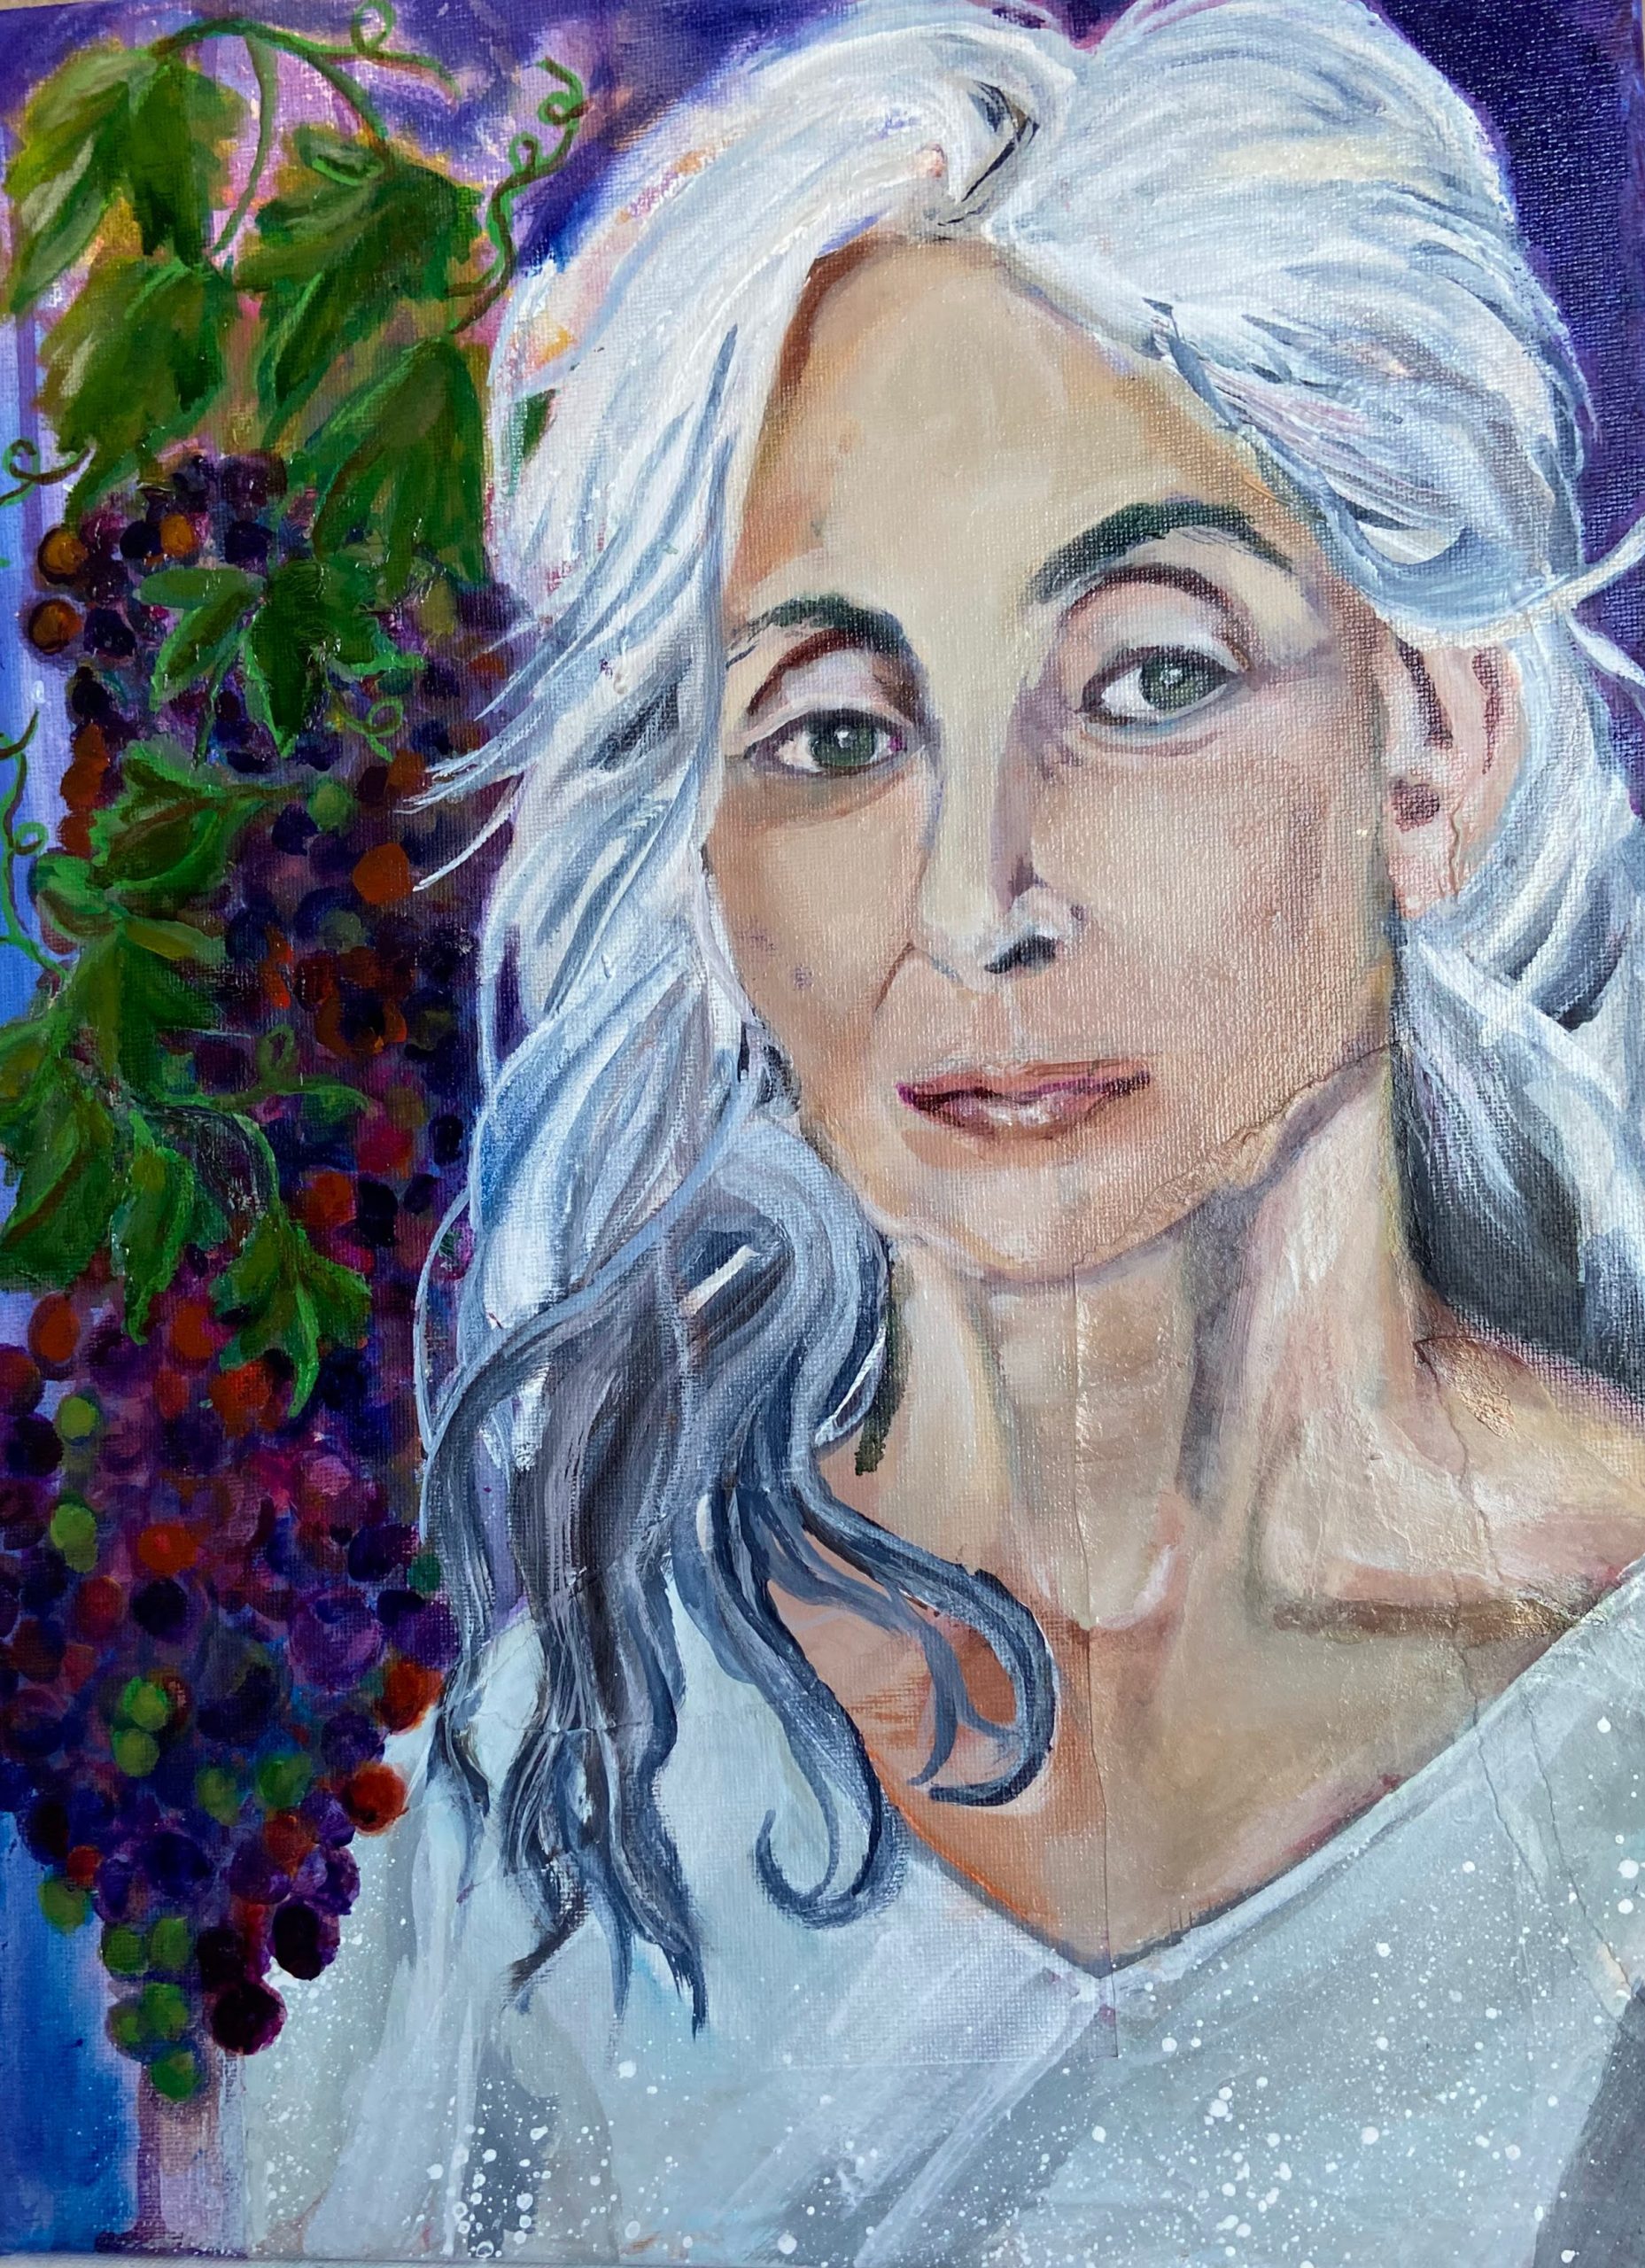 Portrait of a mature woman surrounded by grapes